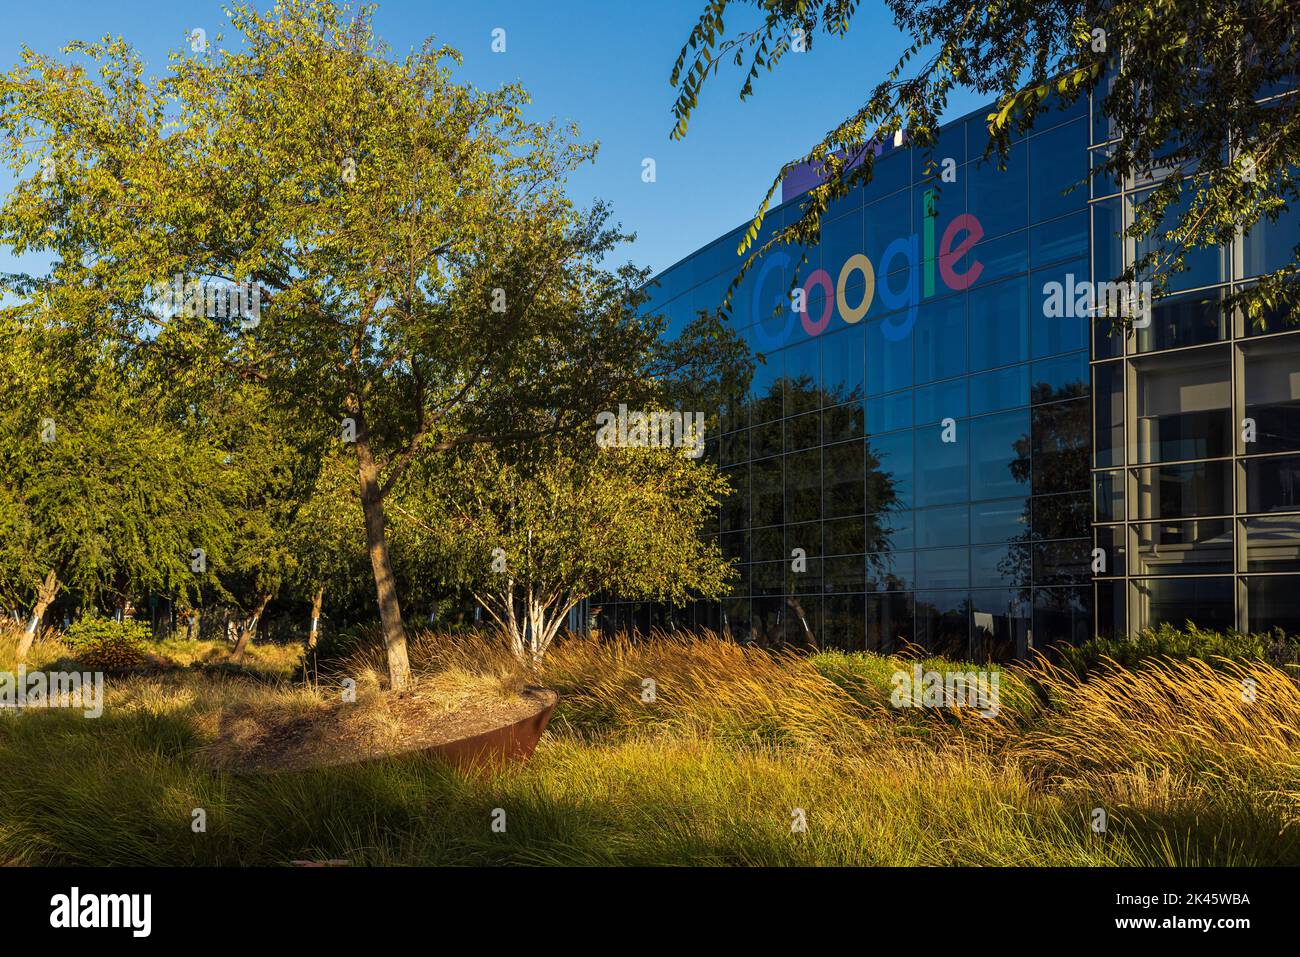 MOUNTAIN VIEW, CA, USA - SEPTEMBER 29, 2022: The Google sign is seen at Googleplex, the corporate headquarters complex of Google and its parent Stock Photo